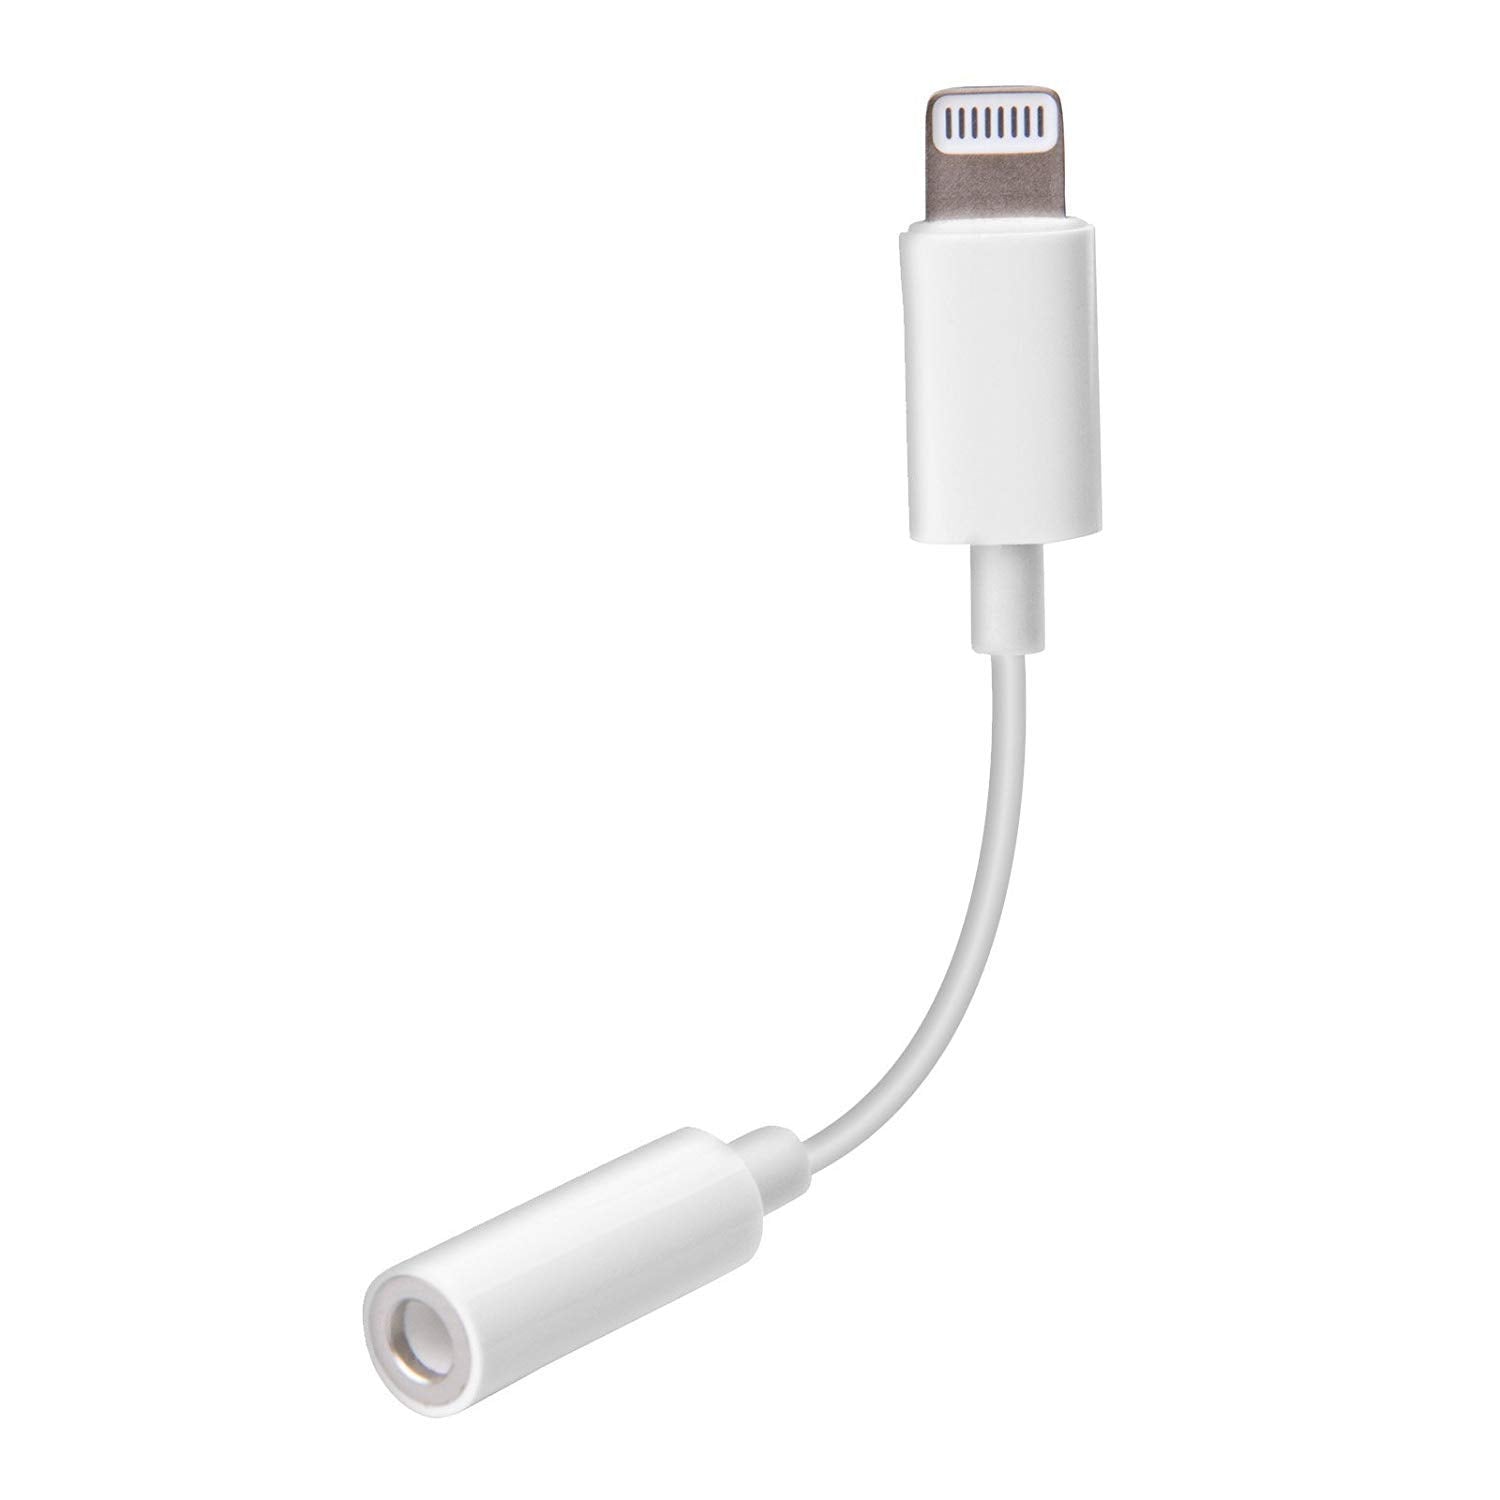 Apple iPhone 7 Plus Heaphone Jack Connector (Lightning to 3.5mm)